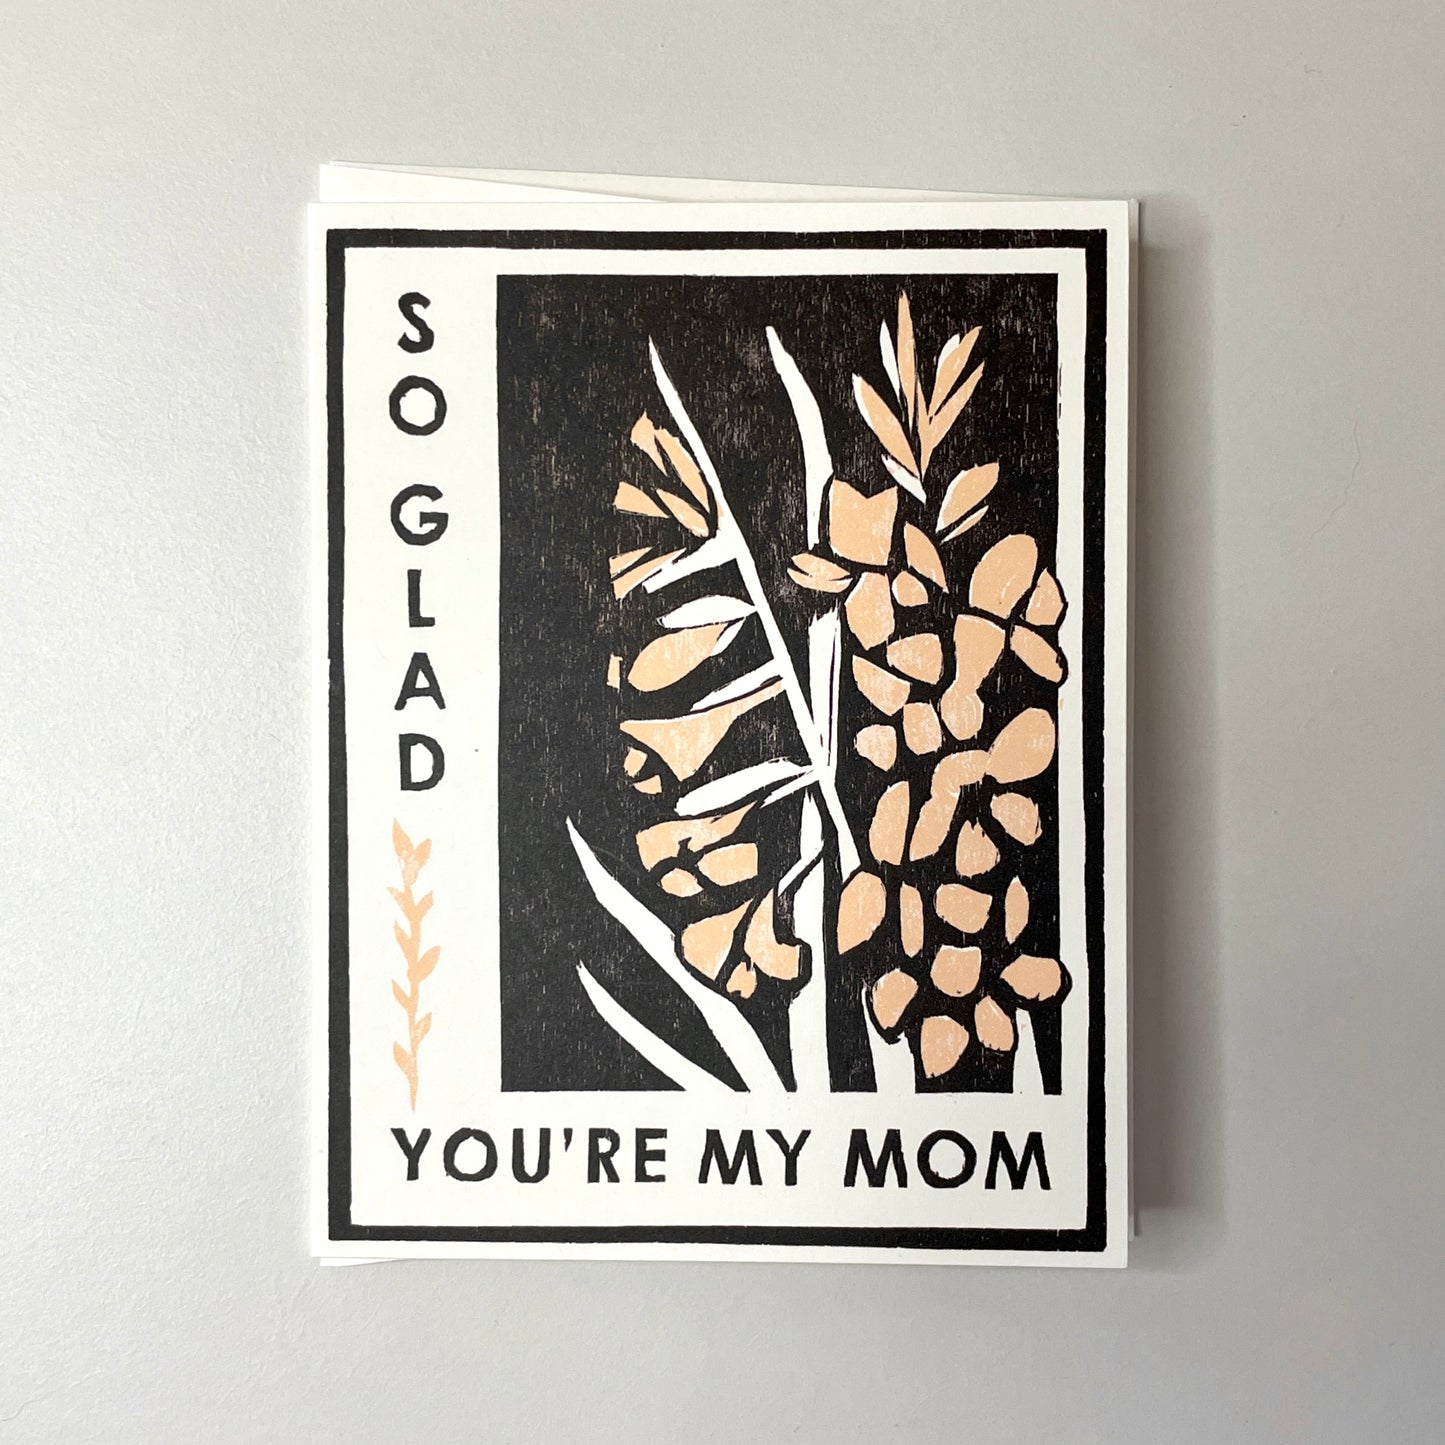 So Glad You’re My Mom Card